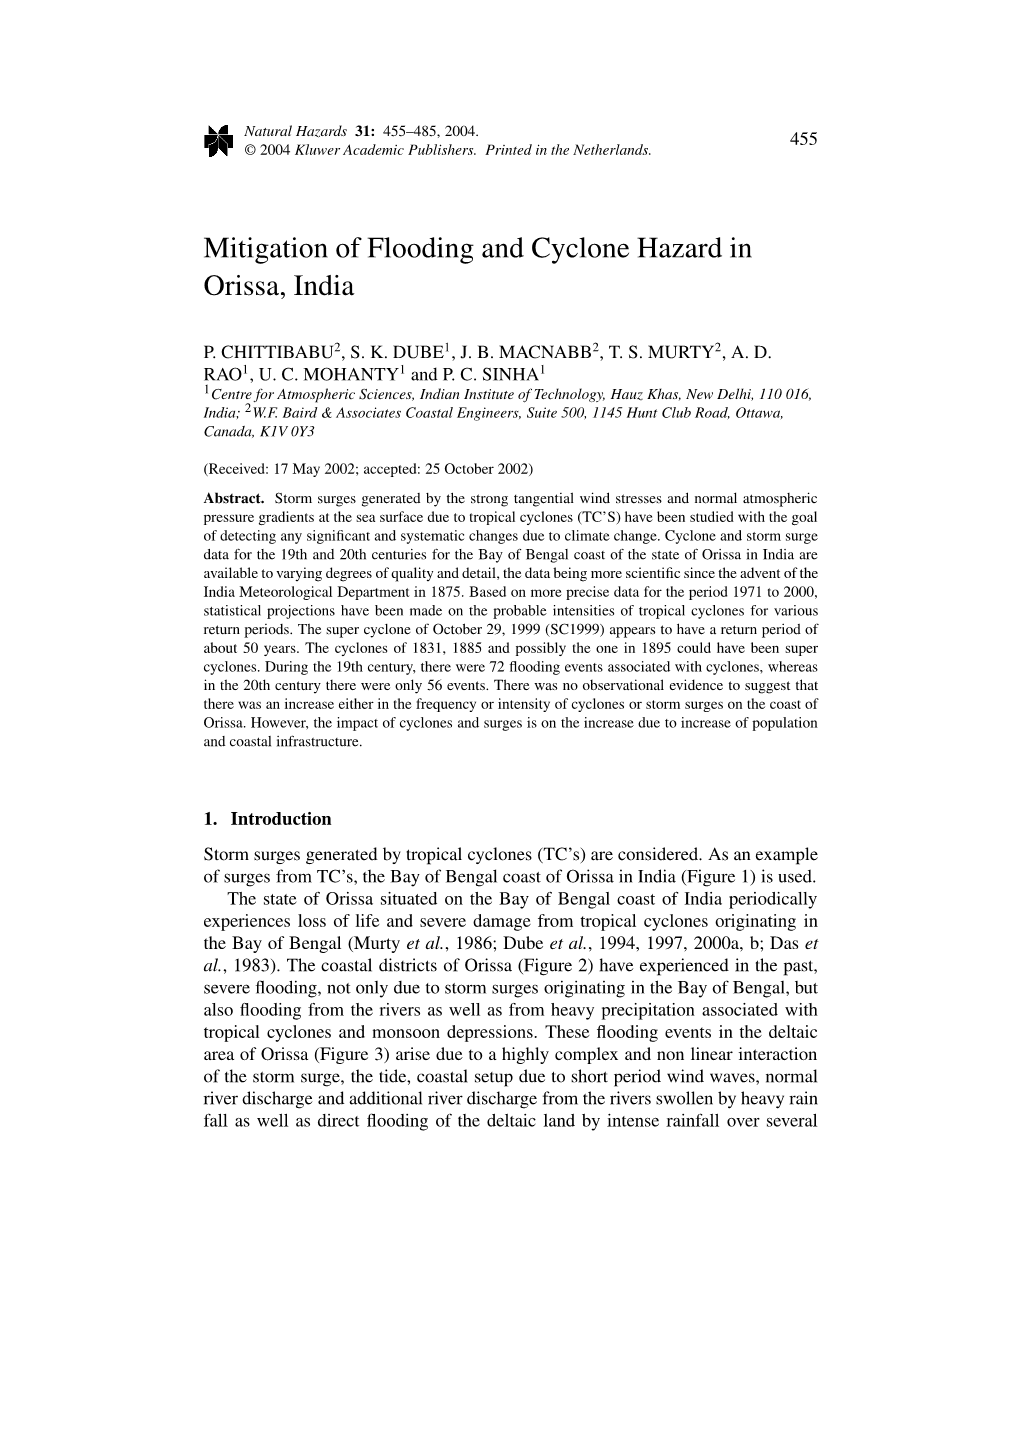 Mitigation of Flooding and Cyclone Hazard in Orissa, India